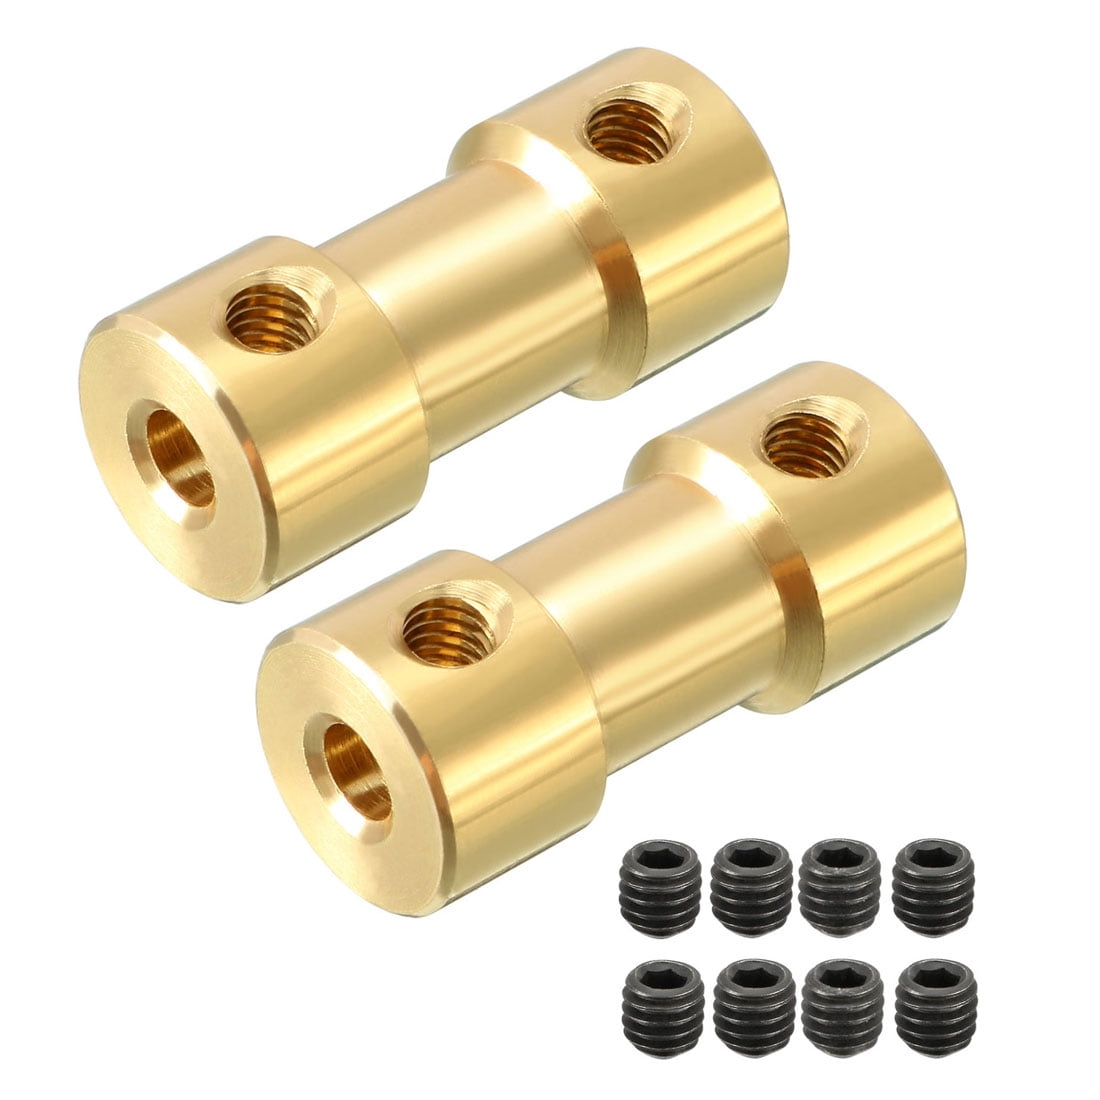 2pcs Shaft Coupler 3mm x 3mm Connector Adapter for RC Airplane Boat Motor L20XD9 